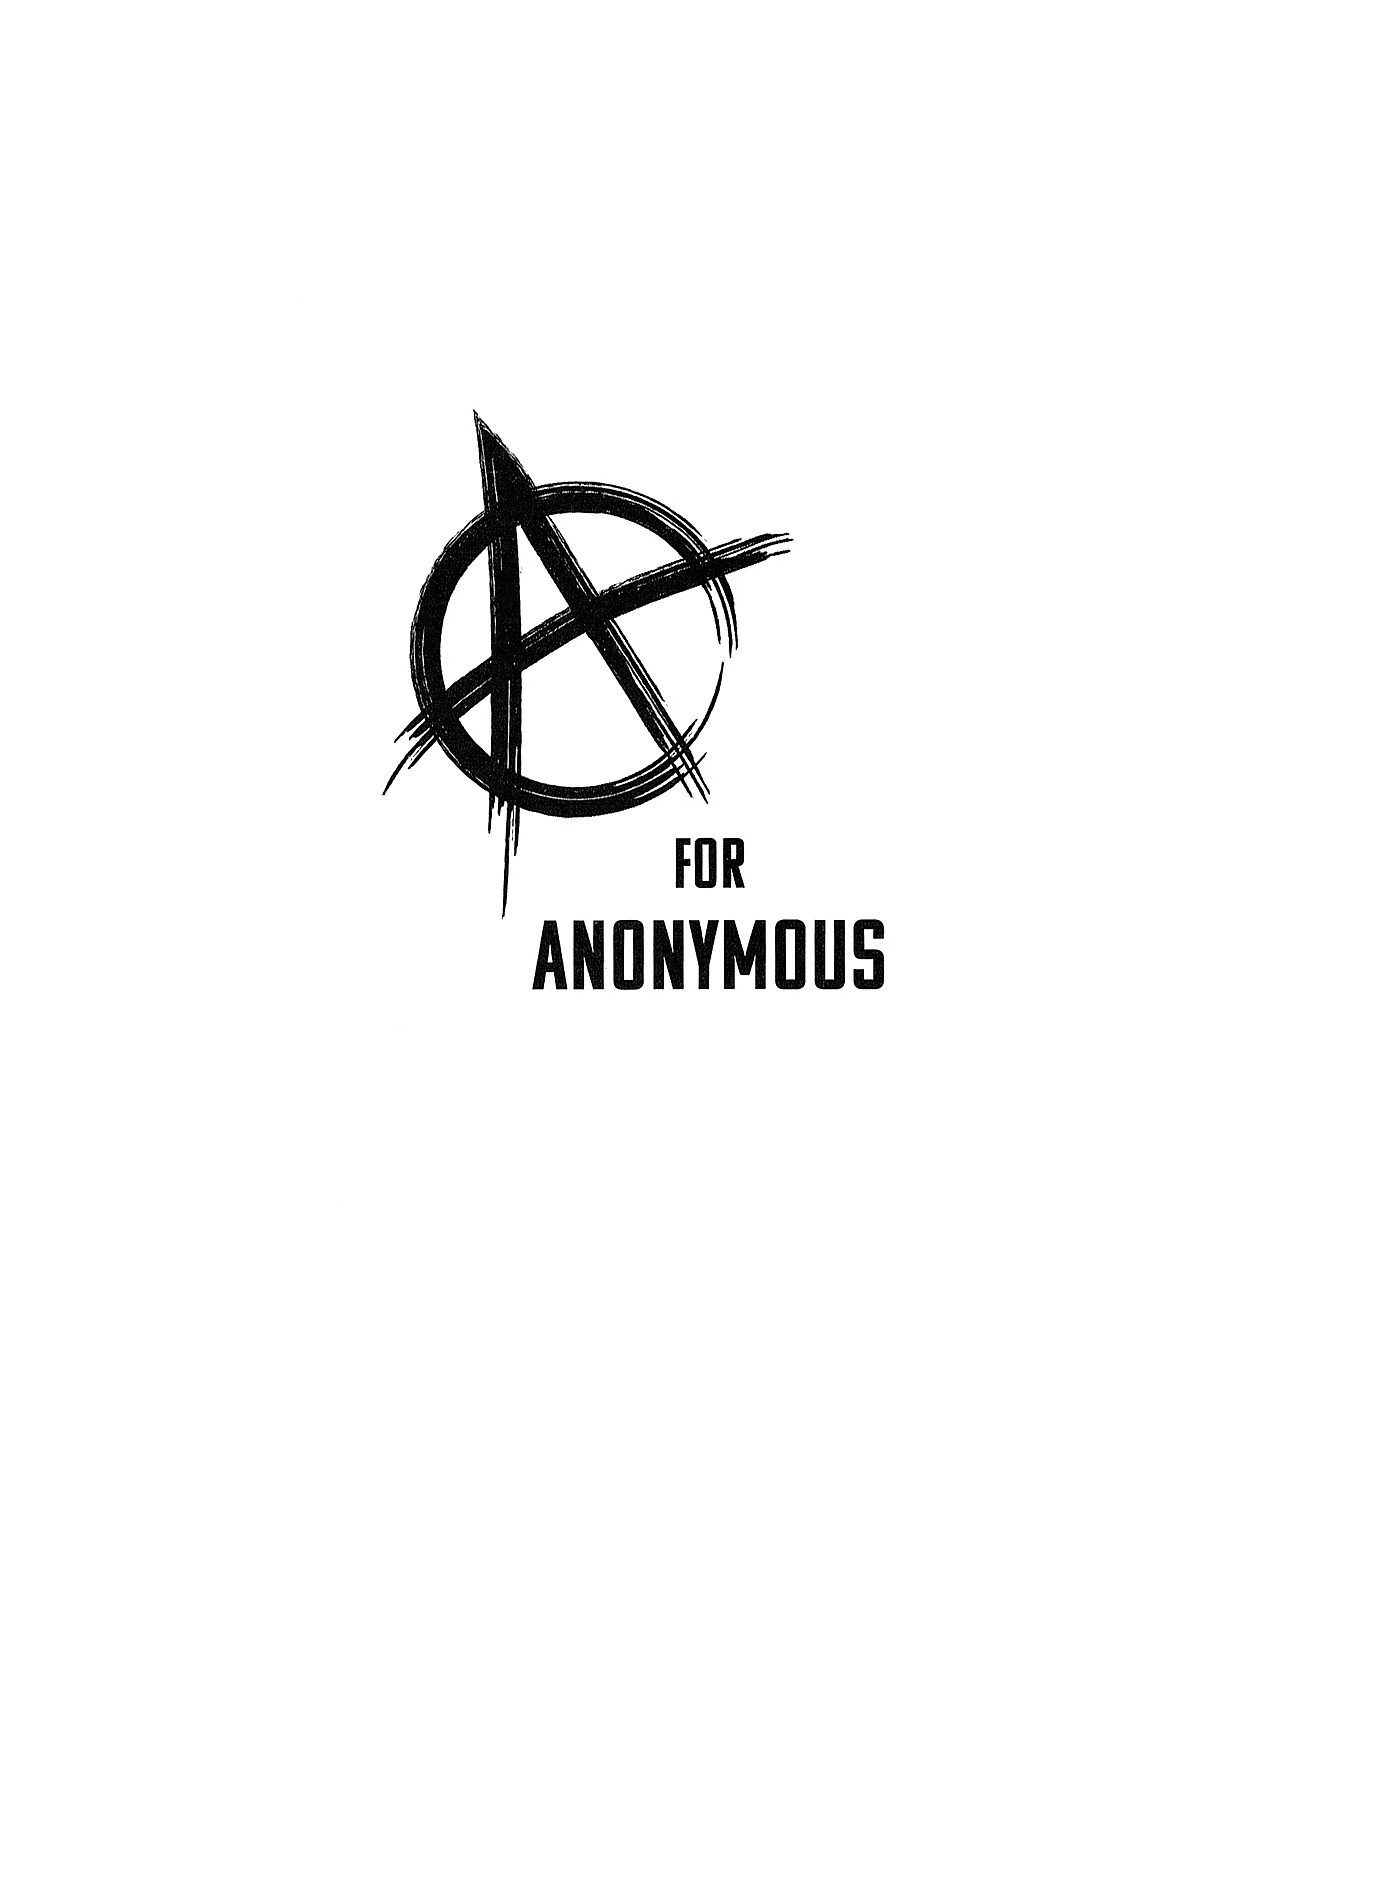 Read online A for Anonymous: How a Mysterious Hacker Collective Transformed the World comic -  Issue # TPB - 3